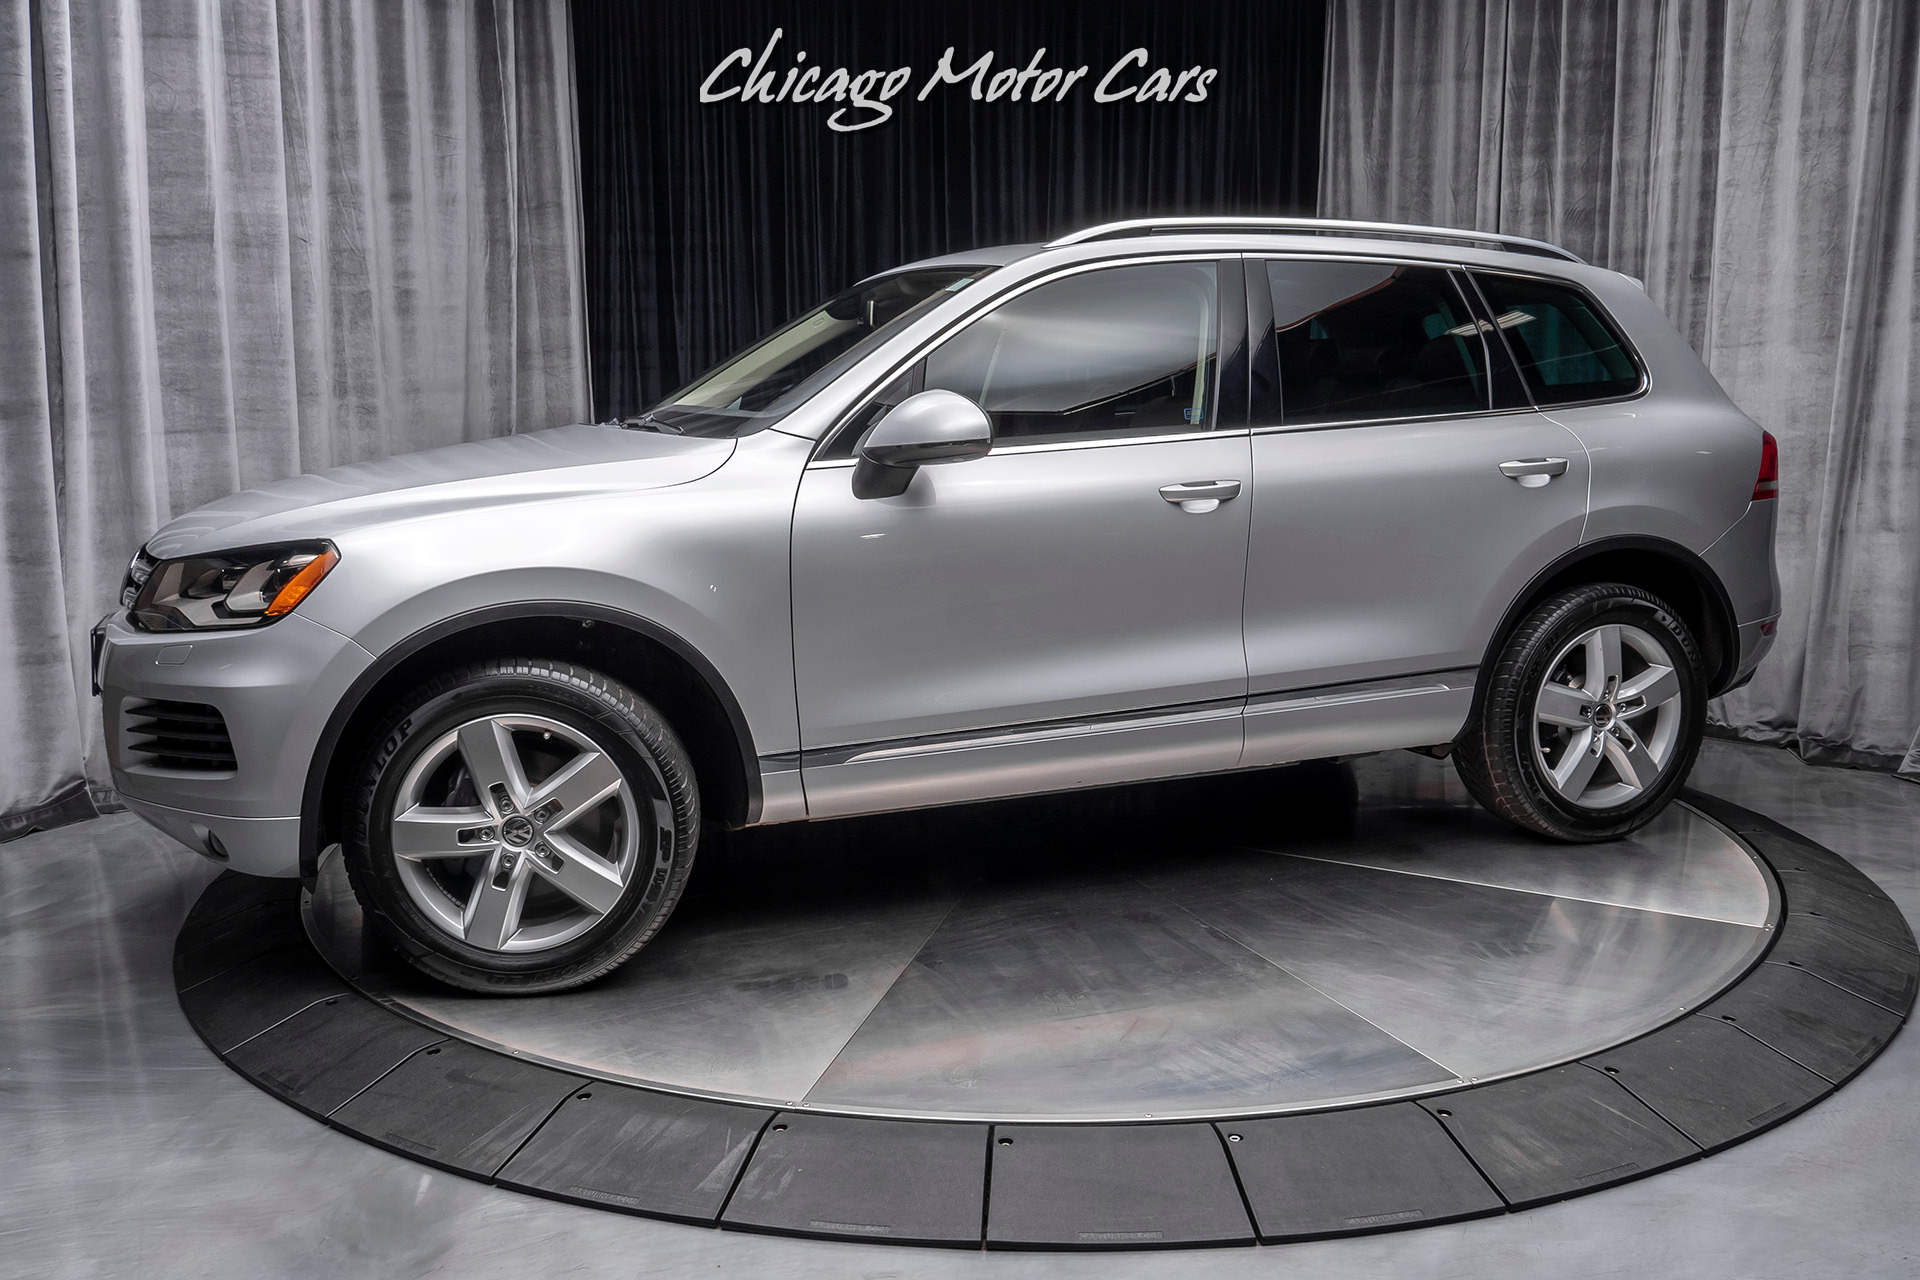 Used 2011 Volkswagen Touareg TDI Lux AWD For Sale (Special Pricing) |  Chicago Motor Cars Stock #16284